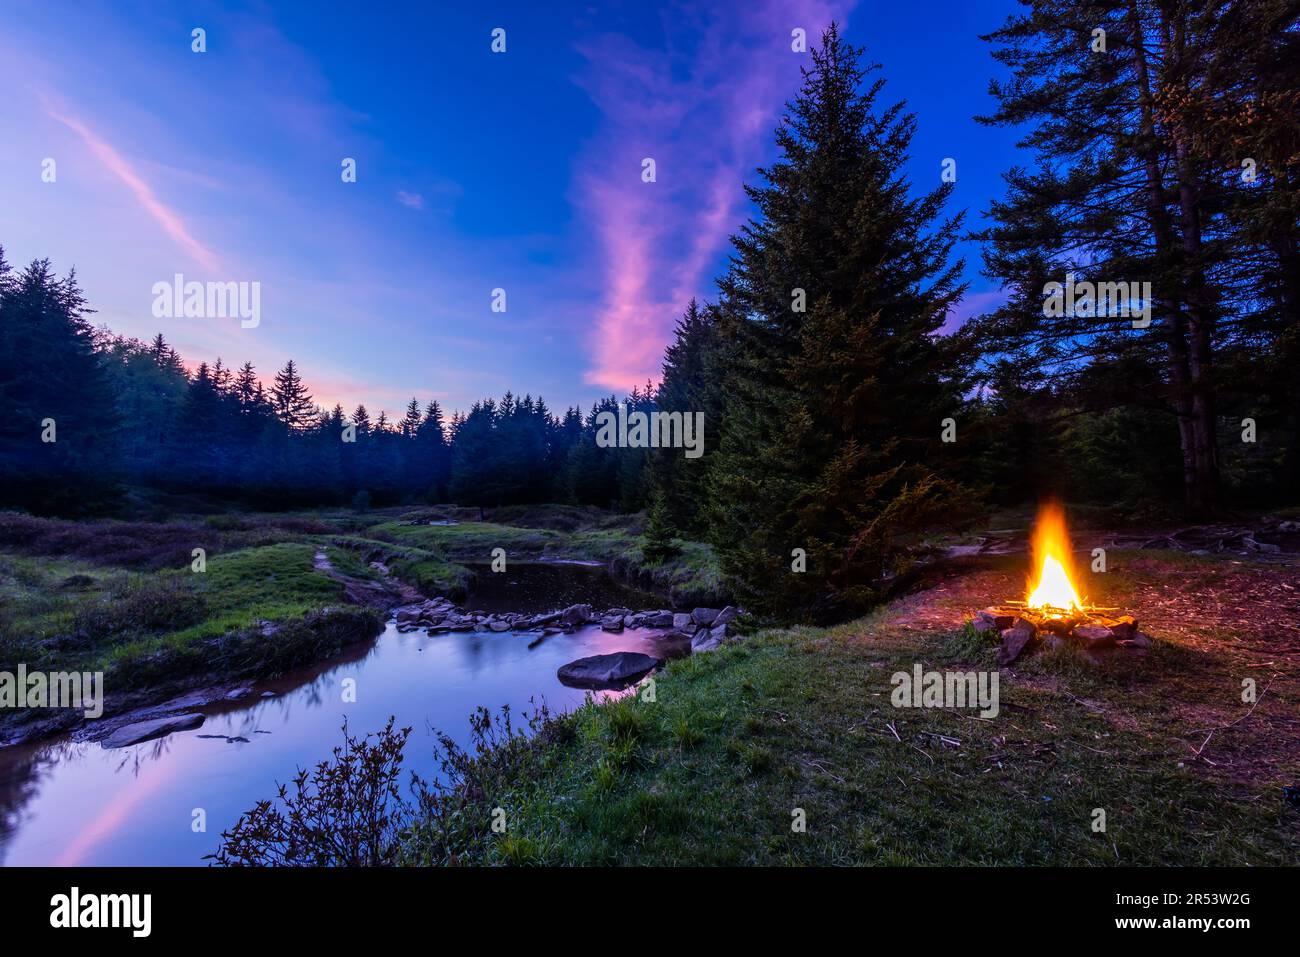 In the Dolly Sods Wilderness in West Virginia, a campfire burns next to the Left Fork of Red Creek where the Blackbird Knob Trail crosses it. Stock Photo